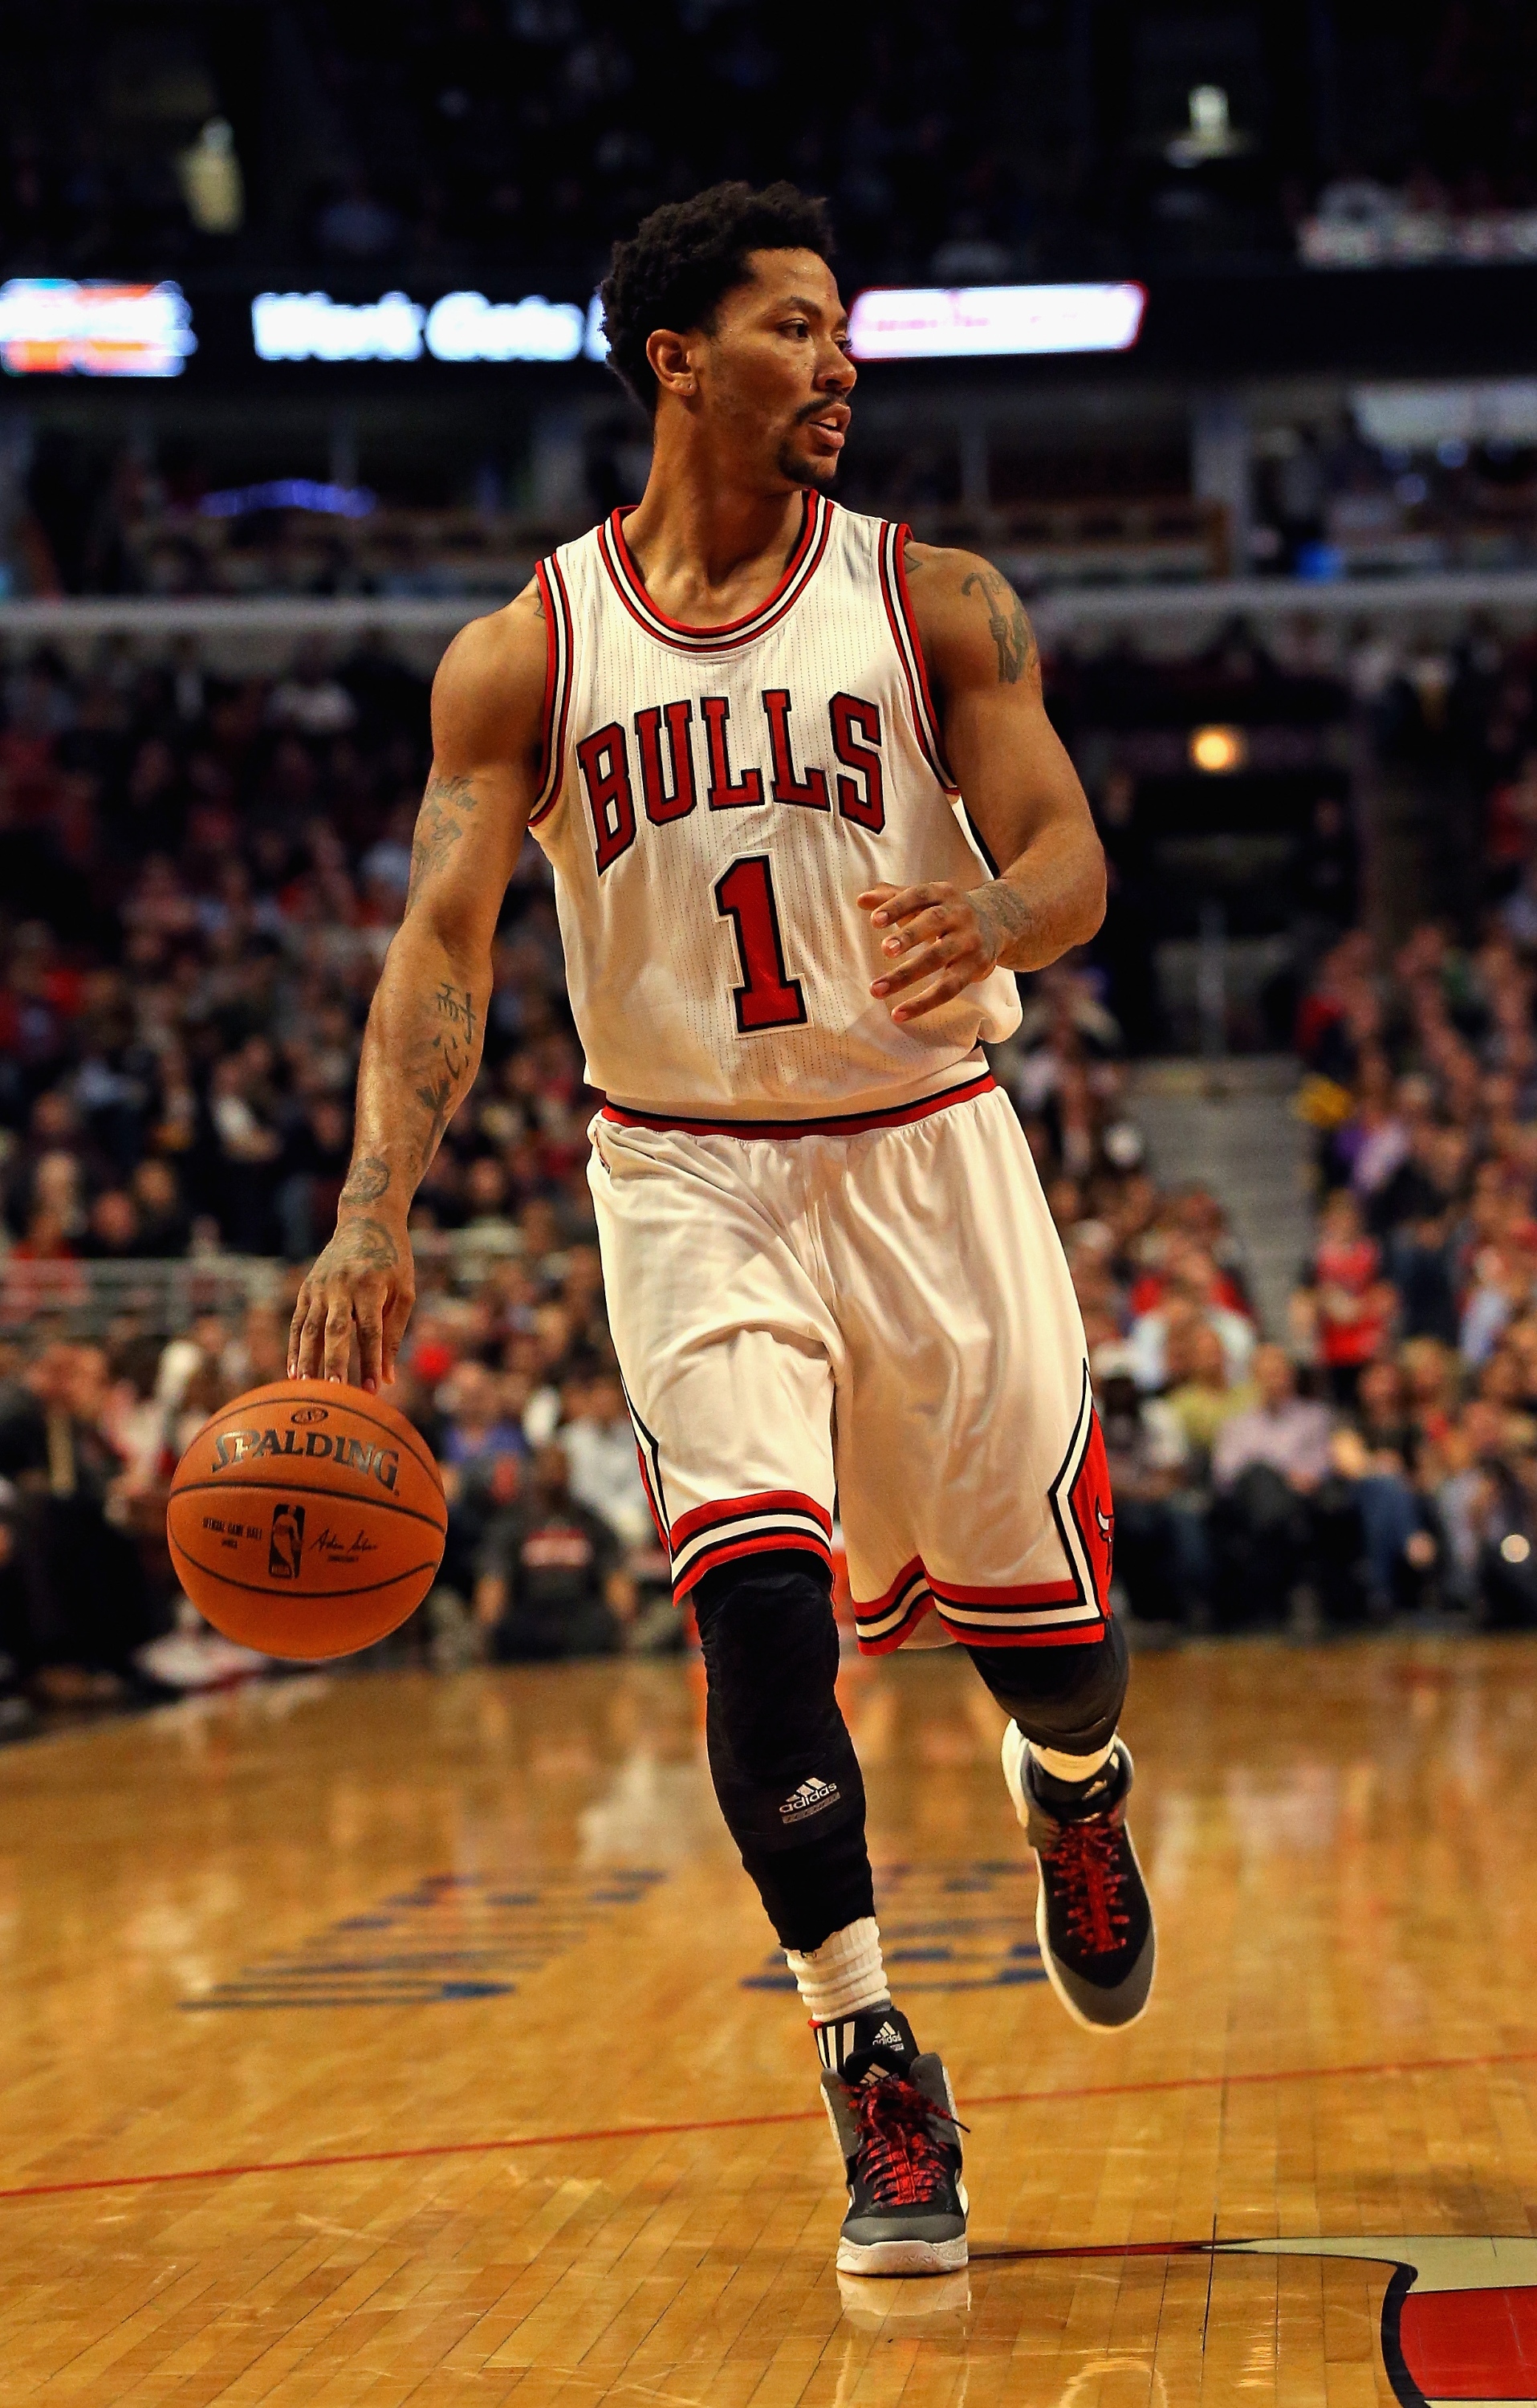 CHICAGO, IL - APRIL 15: Derrick Rose #1 of the Chicago Bulls brings the ball up the court against the Atlanta Hawks at the United Center on April 15, 2015 in Chicago, Illinois. NOTE TO USER: User expressly acknowledges and agrees that, by downloading and or using this photograph, User is consenting to the terms and conditions of the Getty Images License Agreement. (Photo by Jonathan Daniel/Getty Images)